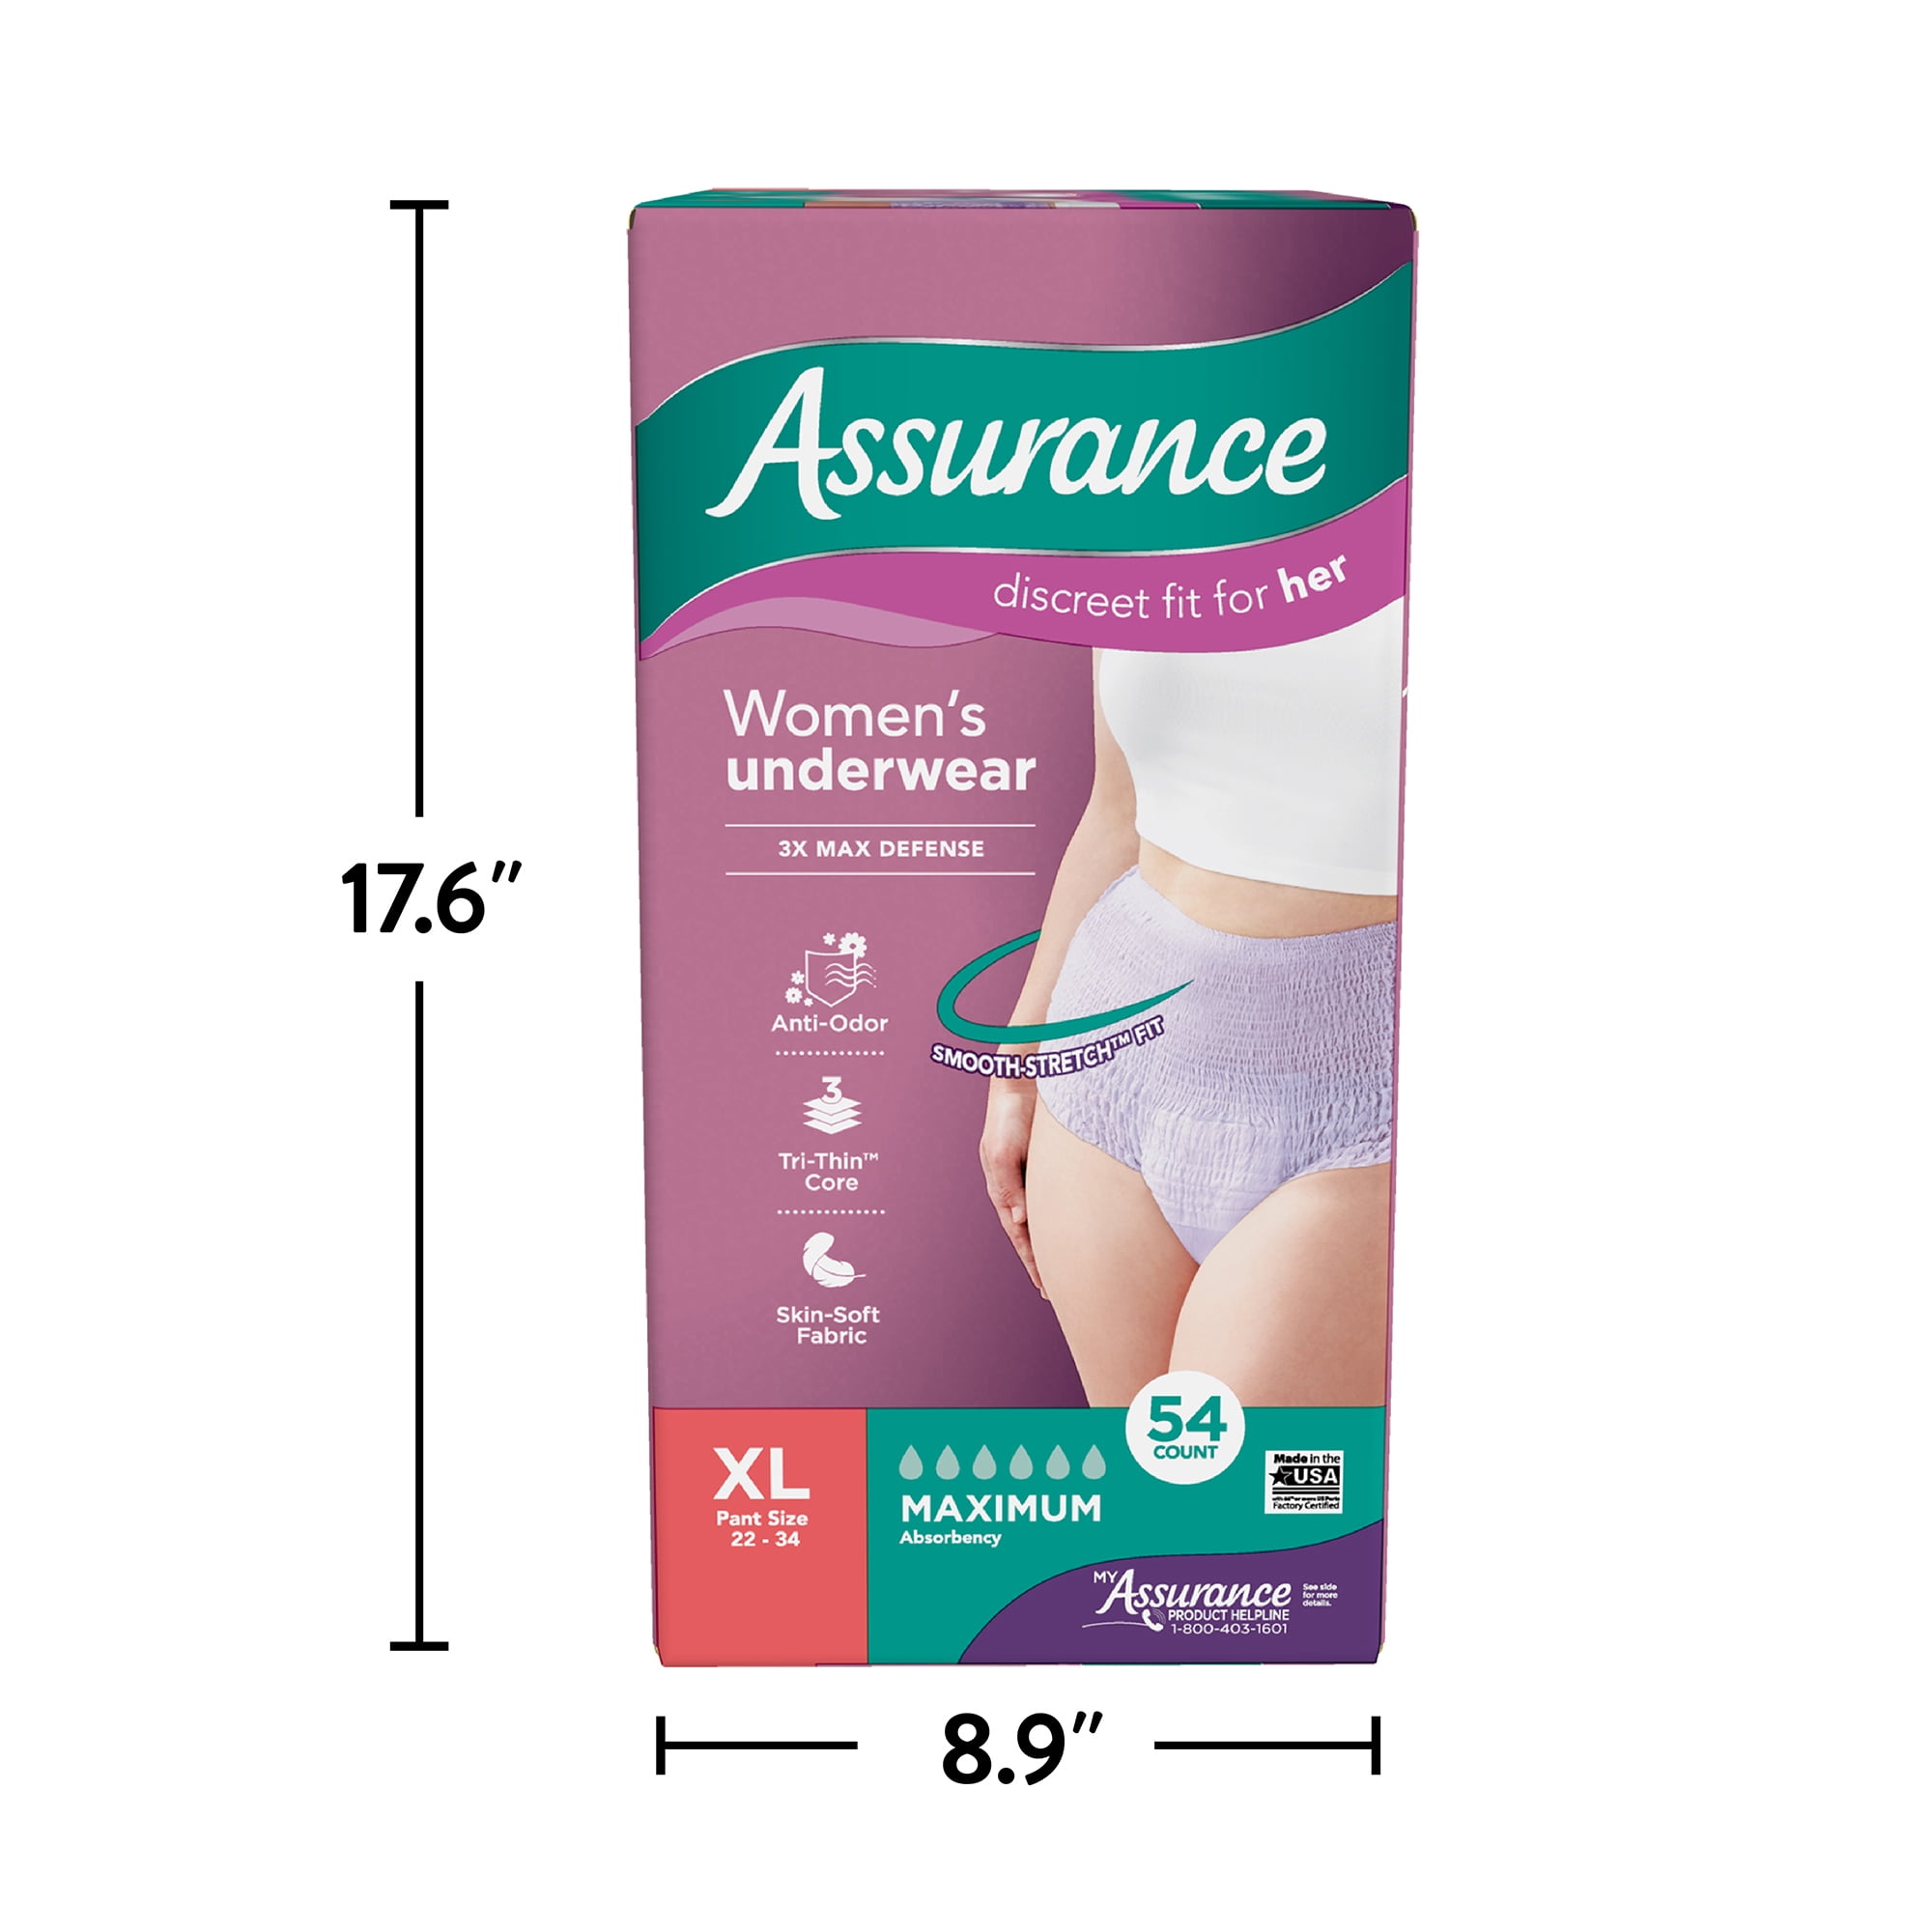 16 Assurance Women's Underwear size XL - health and beauty - by owner -  household sale - craigslist